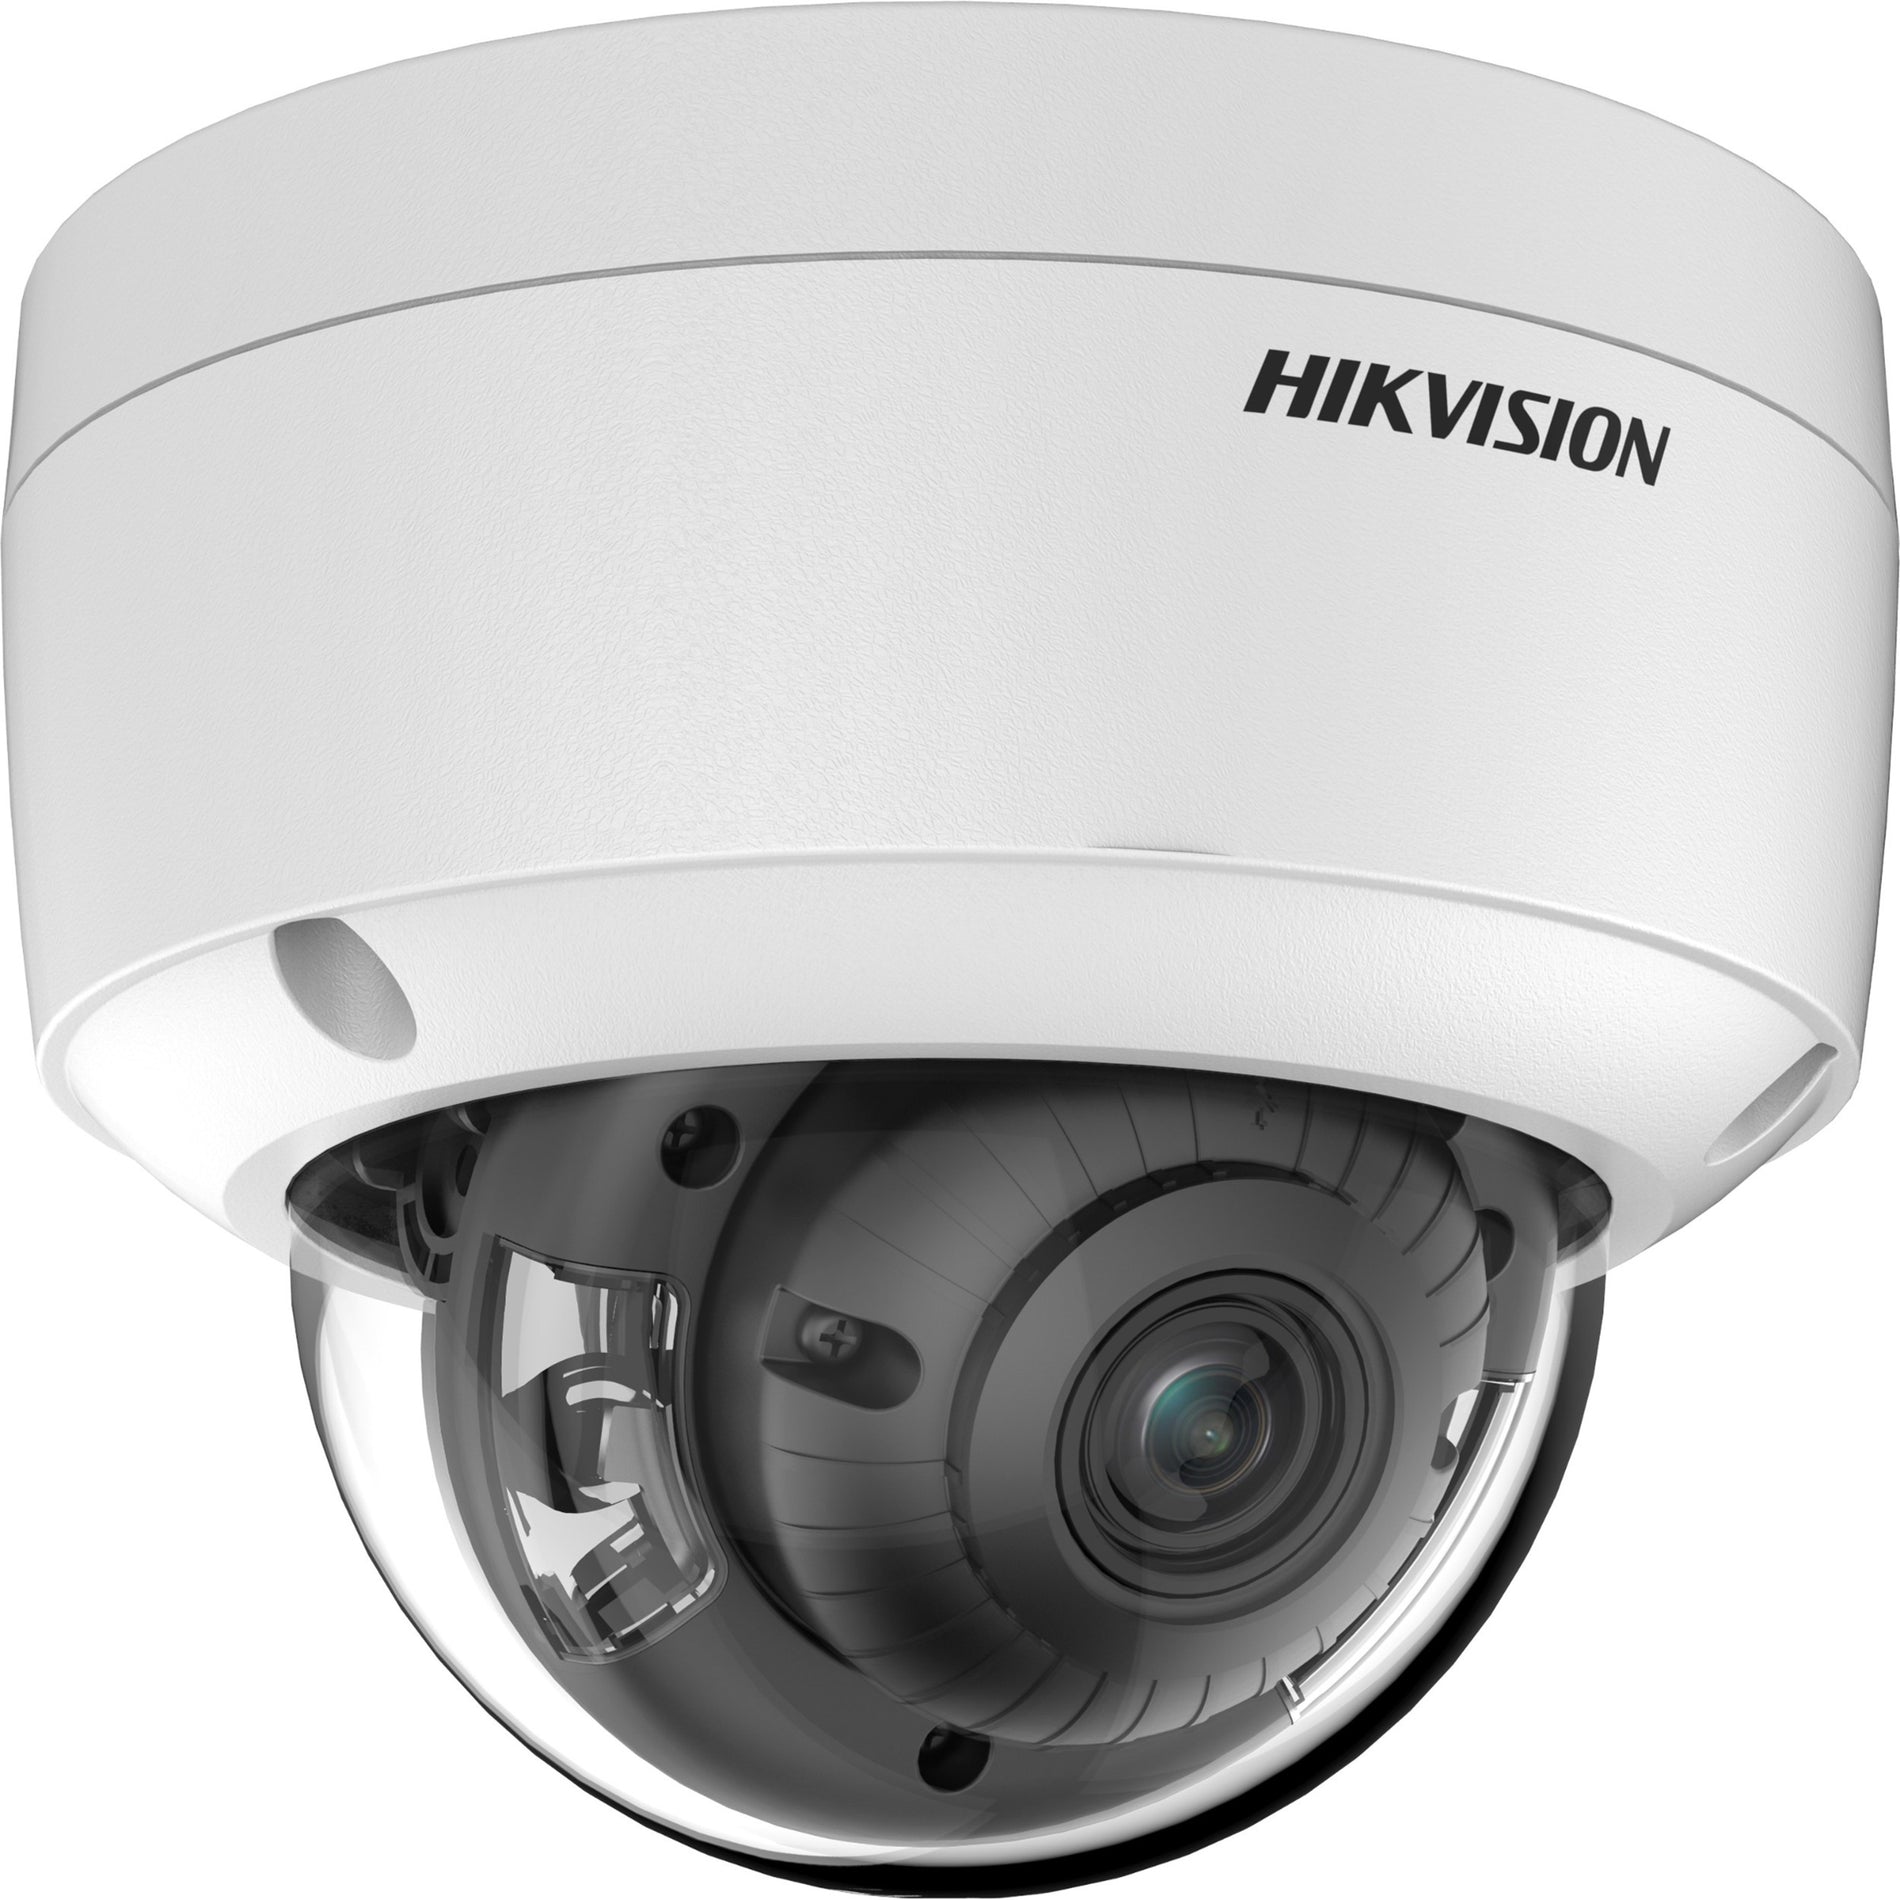 Hikvision DS-2CD2147G2-LSU 2.8MM ColorVu 4 MP Fixed Dome Network Camera, Color, Wide Dynamic Range, SD Card Local Storage